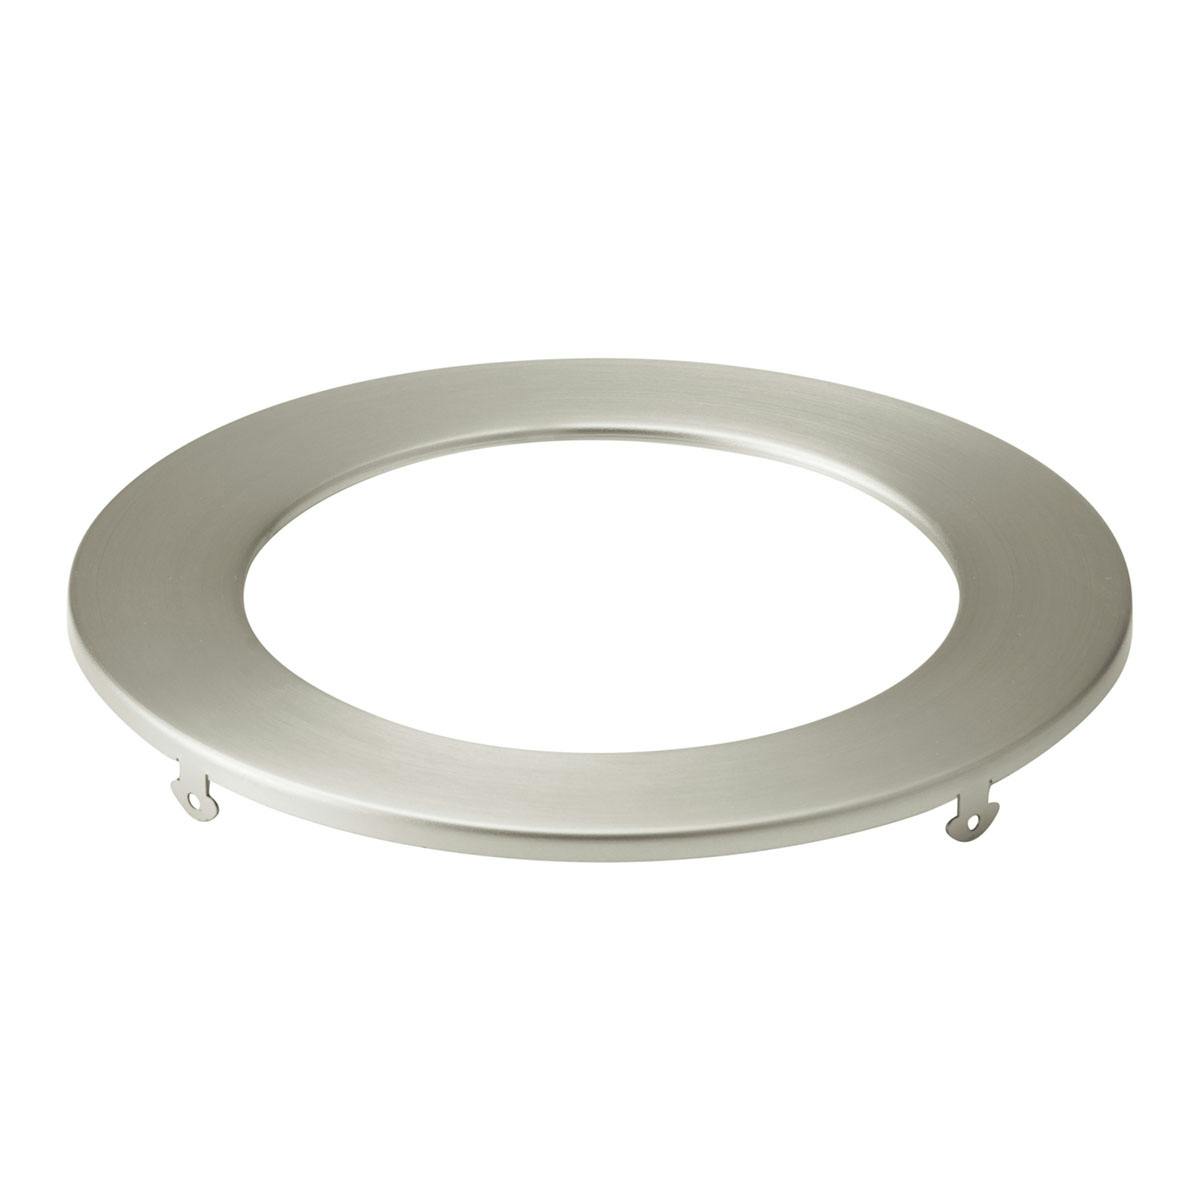 Direct to Ceiling Unv Accessor Direct to Ceiling Trim DLTSL05RNI